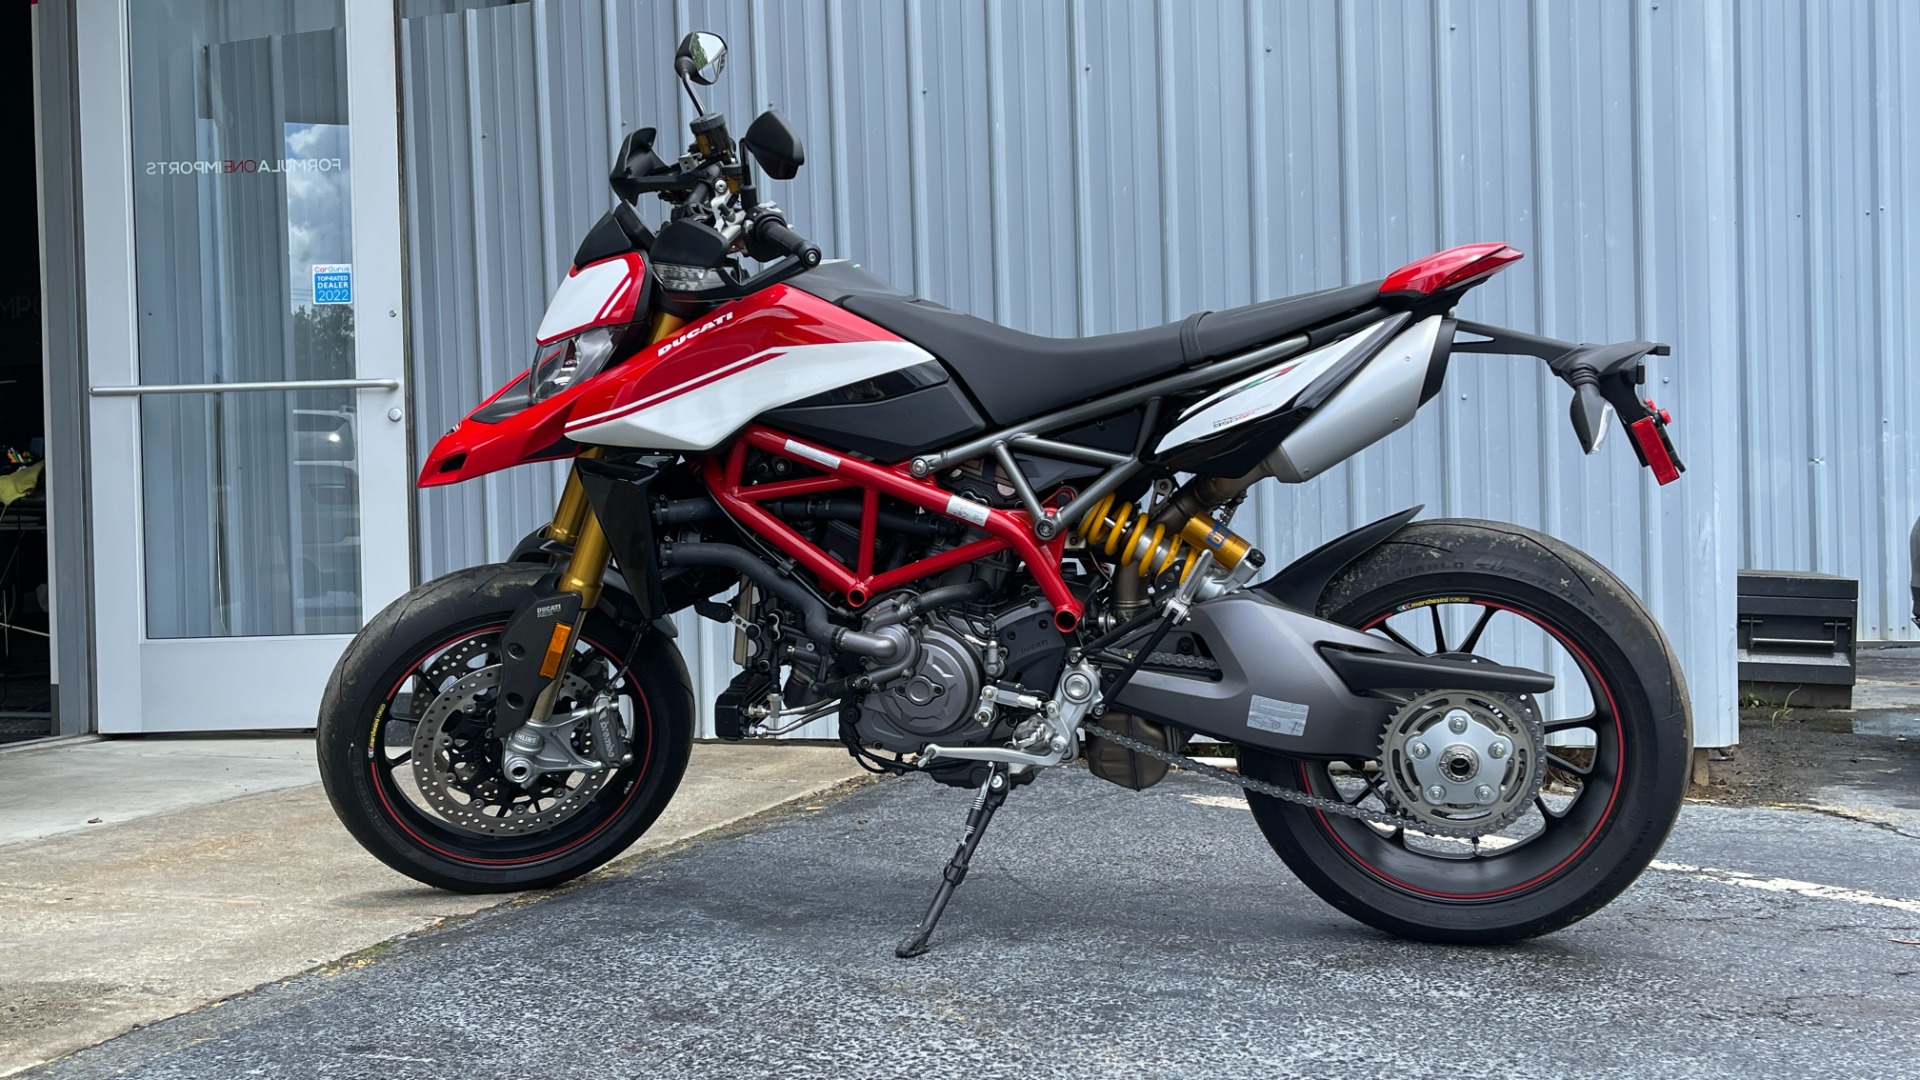 Used 2020 Ducati HYPERMOTARD 950 SP MOTORCYCLE / 114HP (85 kW) / LIKE NEW for sale $16,999 at Formula Imports in Charlotte NC 28227 1